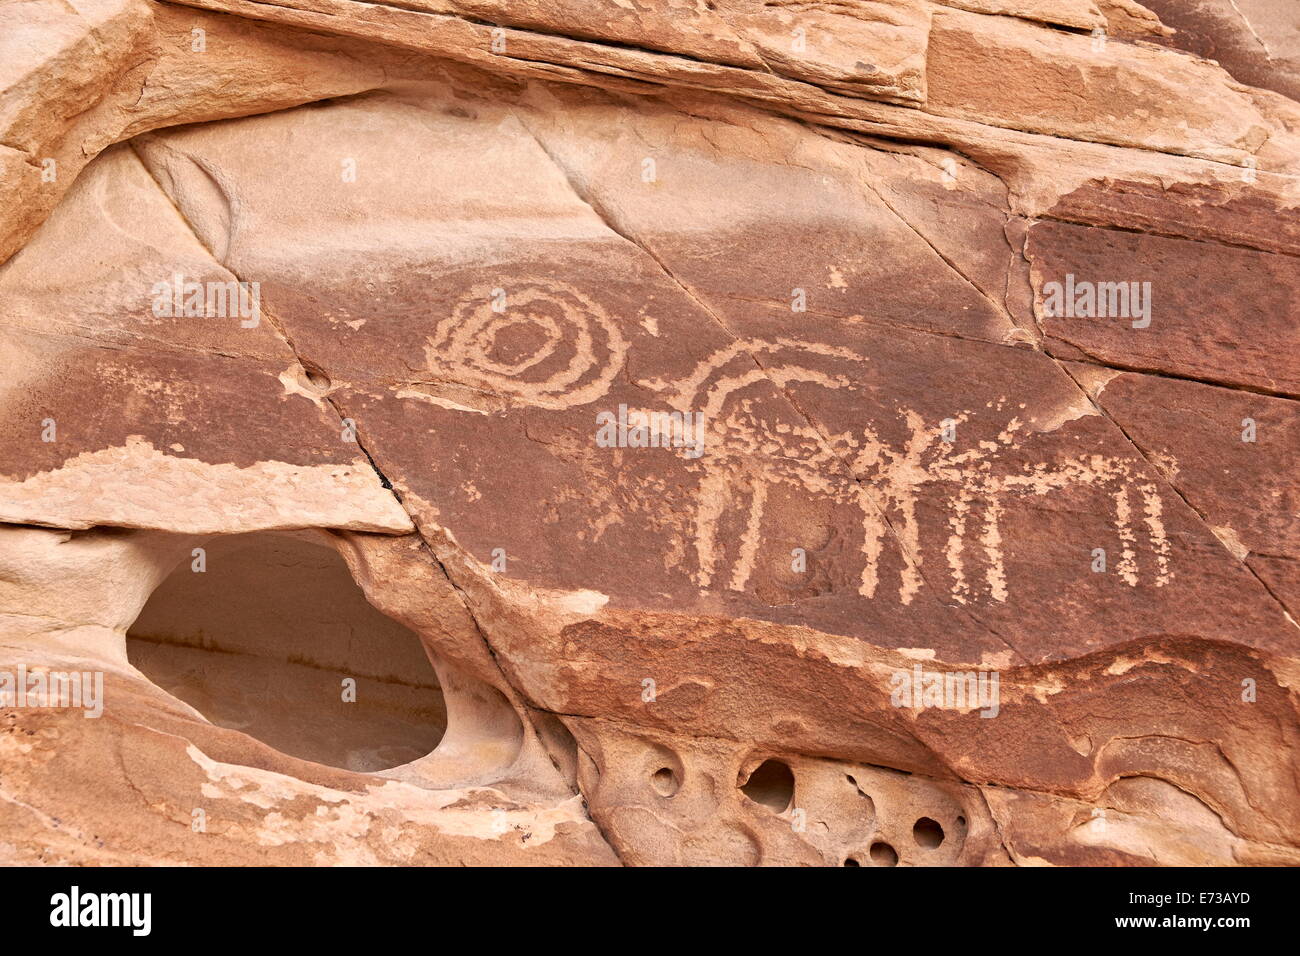 Bighorn sheep and symbol petroglyphs, Gold Butte, Nevada, United States of America, North America Stock Photo